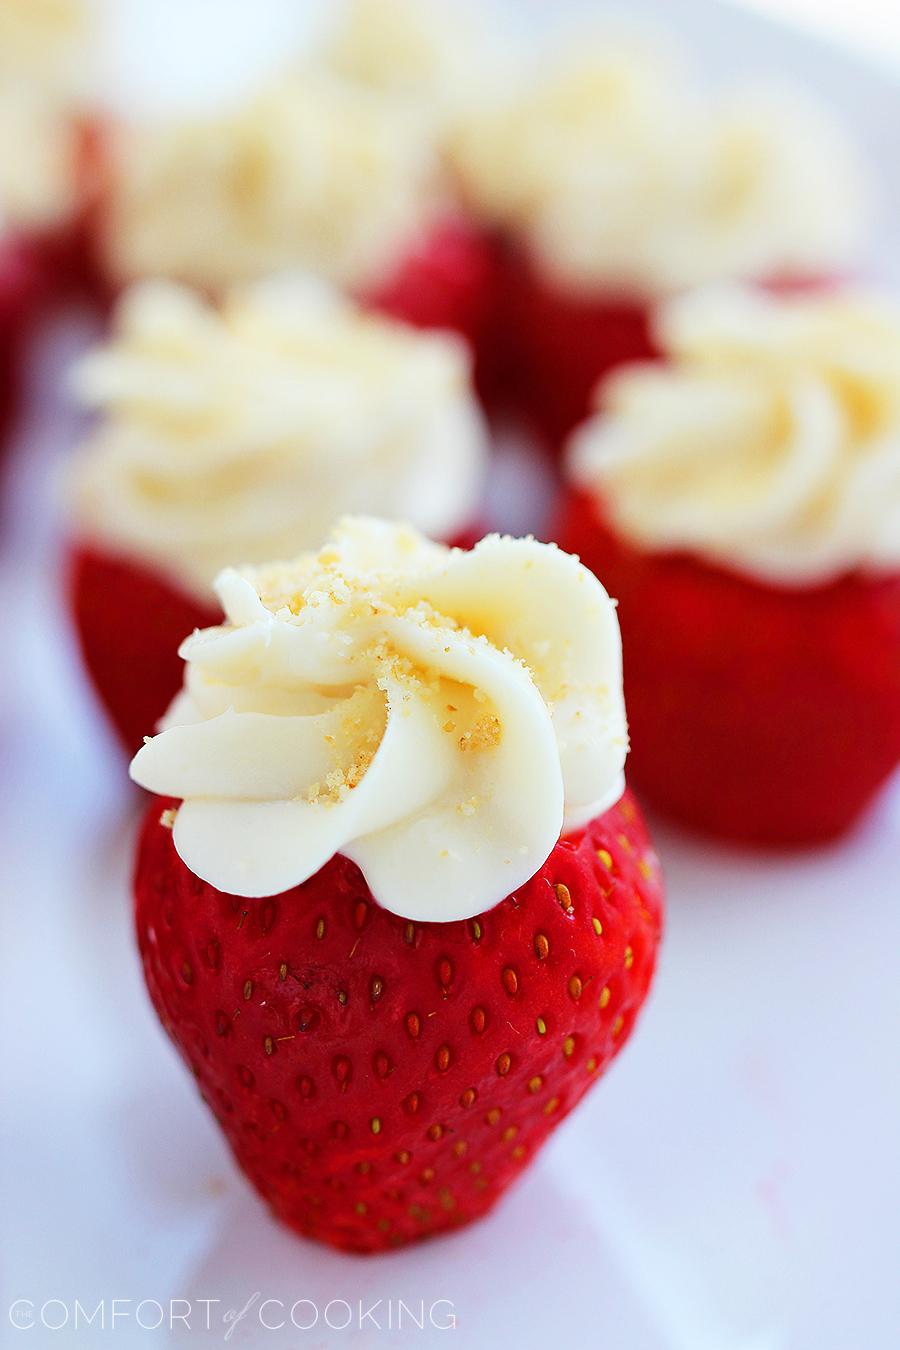 Cheesecake Stuffed Strawberries – Guilt-free cheesecake stuffed strawberries! Perfect for snacking and parties! | thecomfortofcooking.com